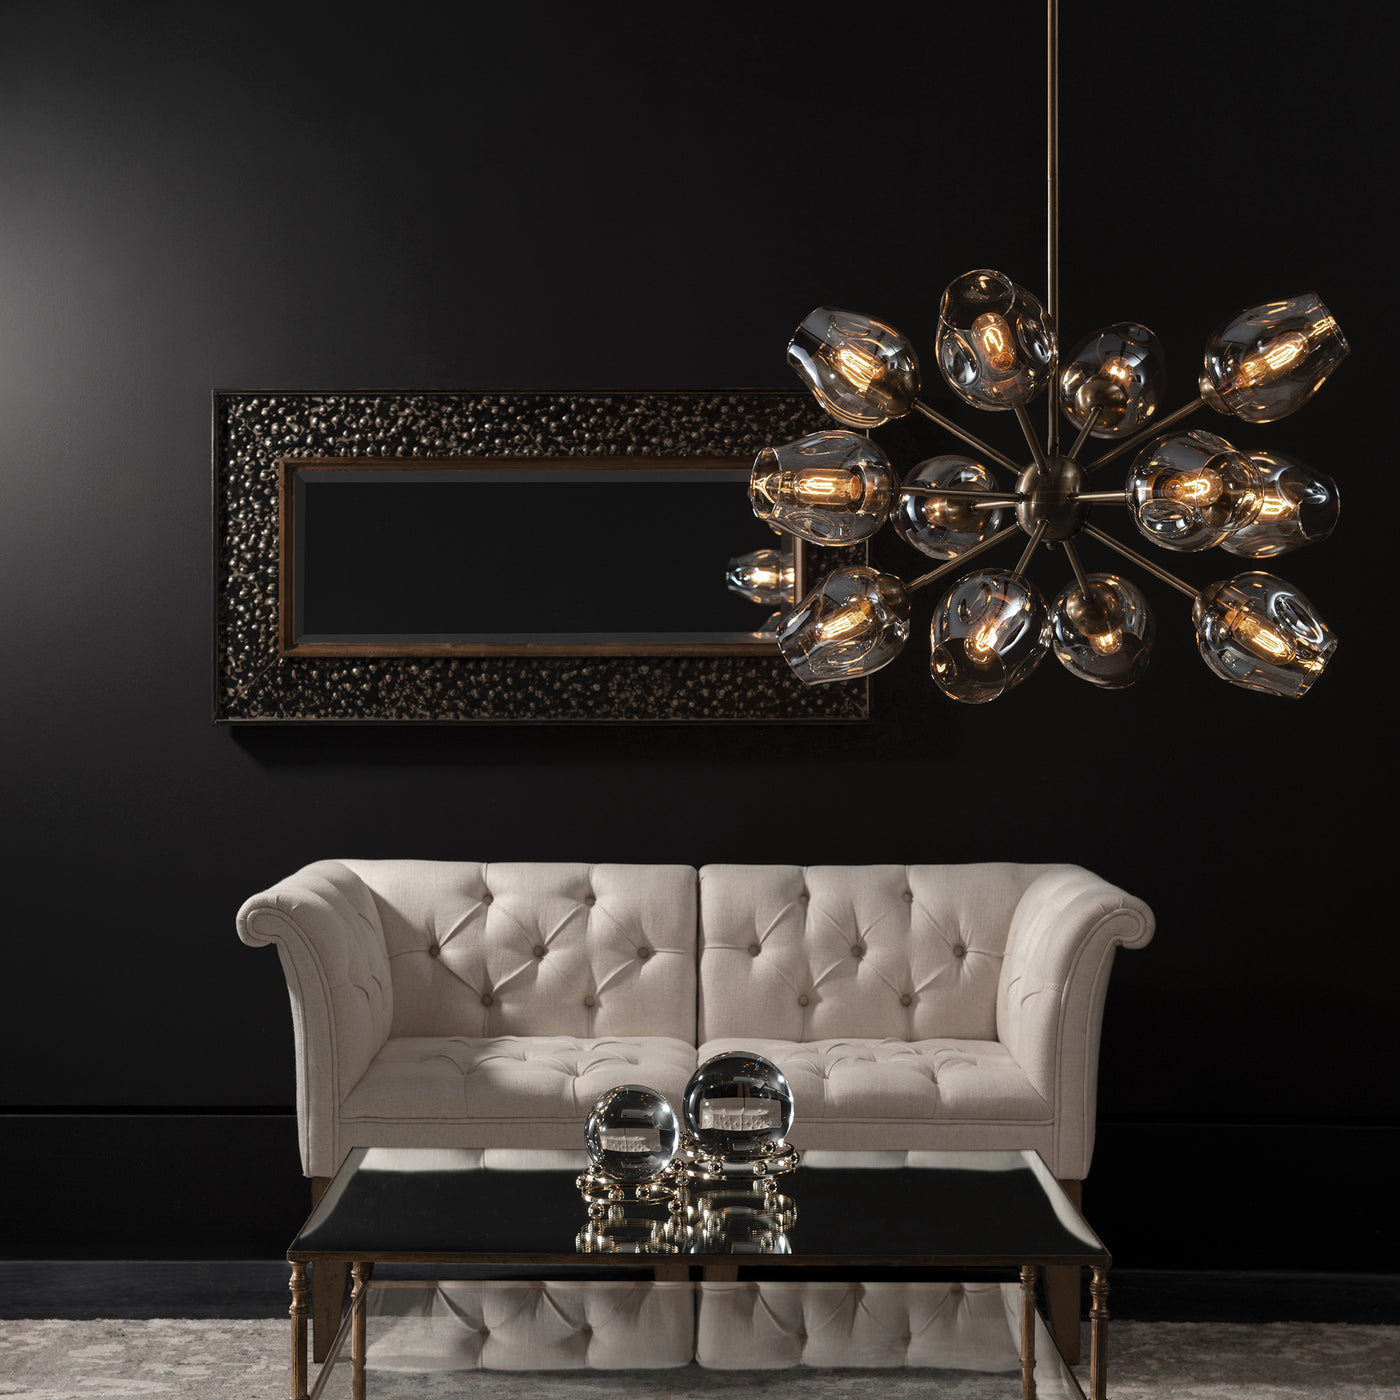 Transitional With A Flair Of Mid-Century Sputnik Style, Our 12 Lt. Rod Hung Chandelier, Features A Warm Antique Brass Fini...